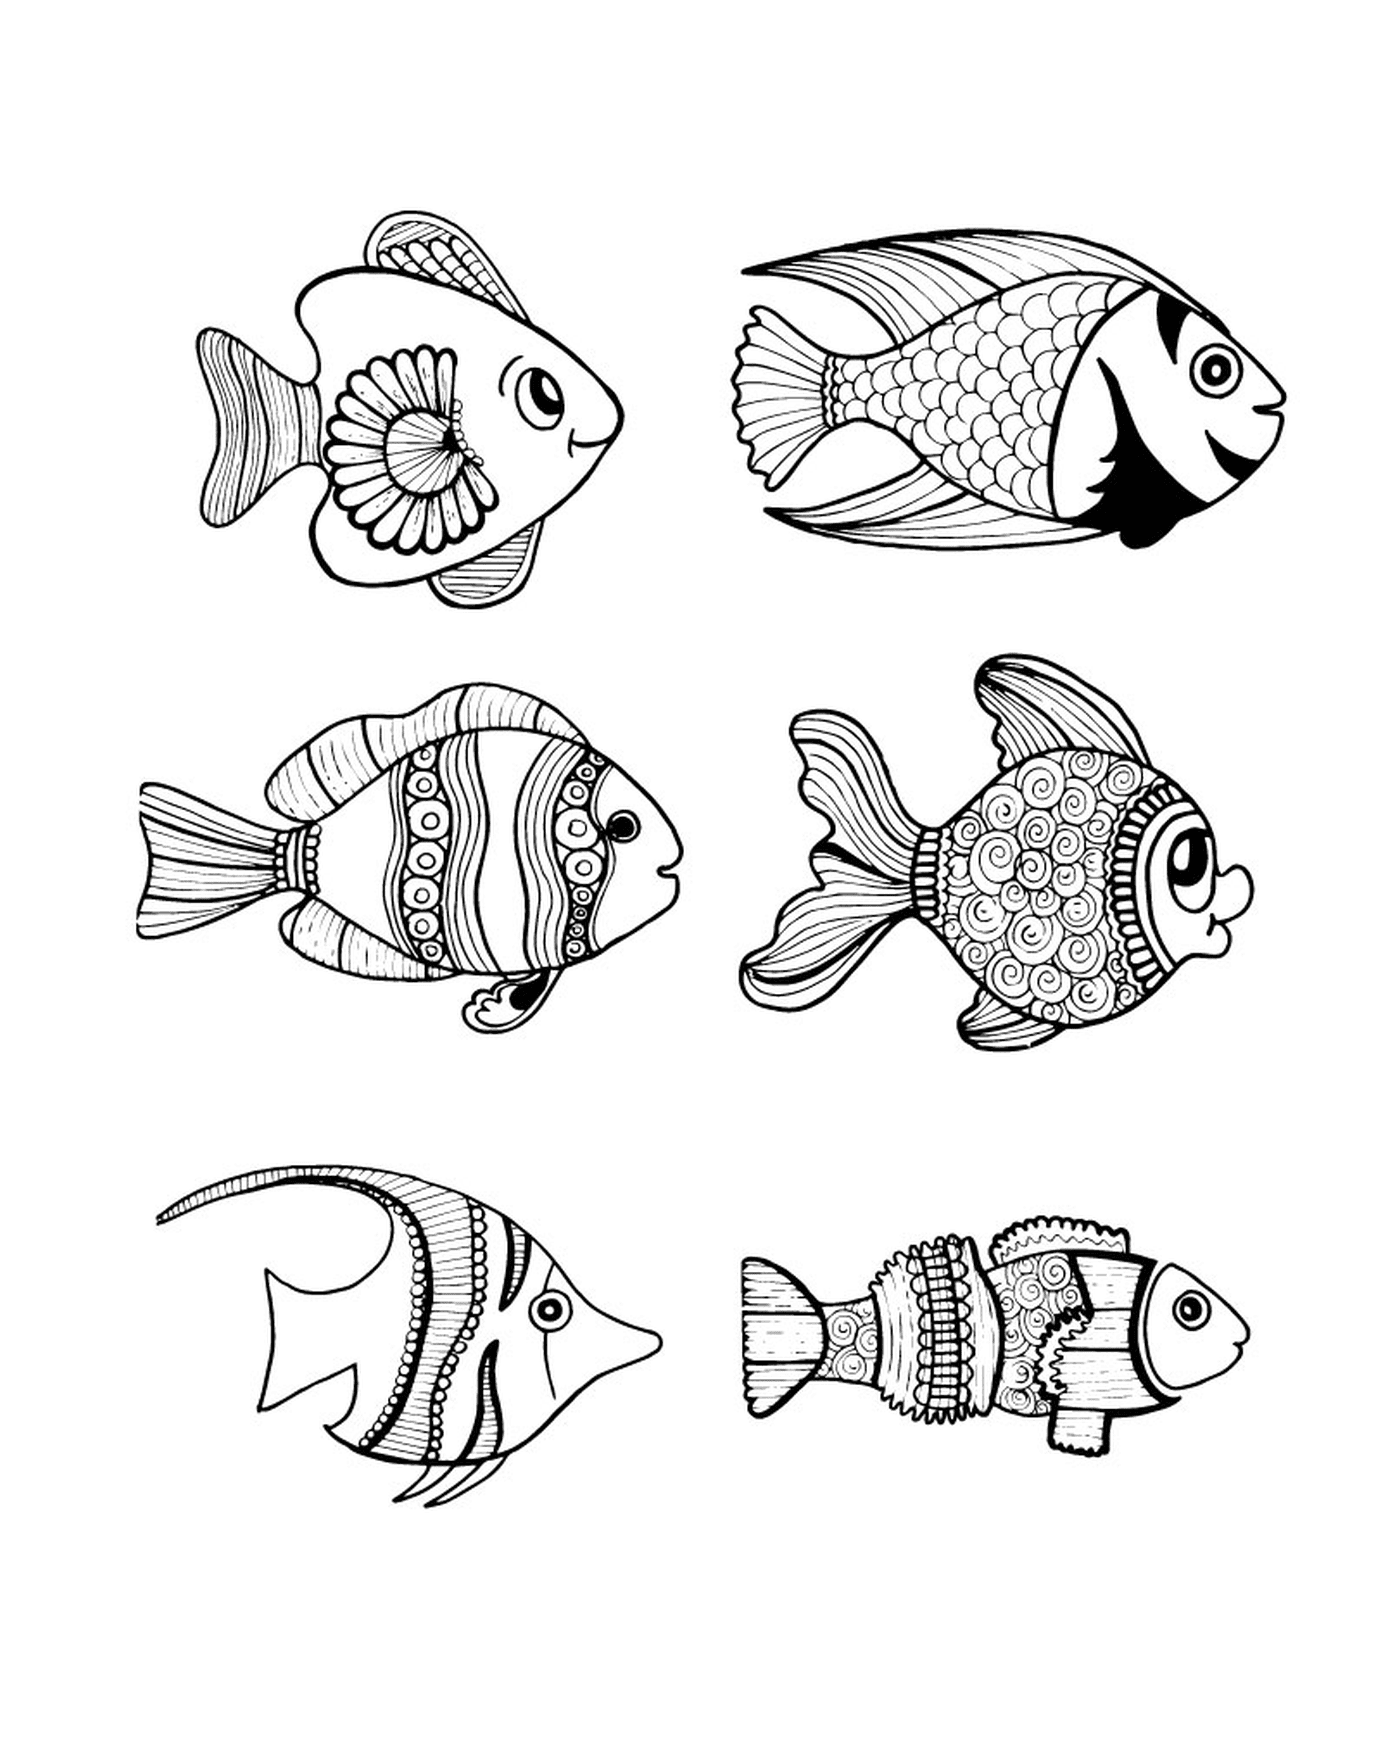  a set of six black and white fish drawings 